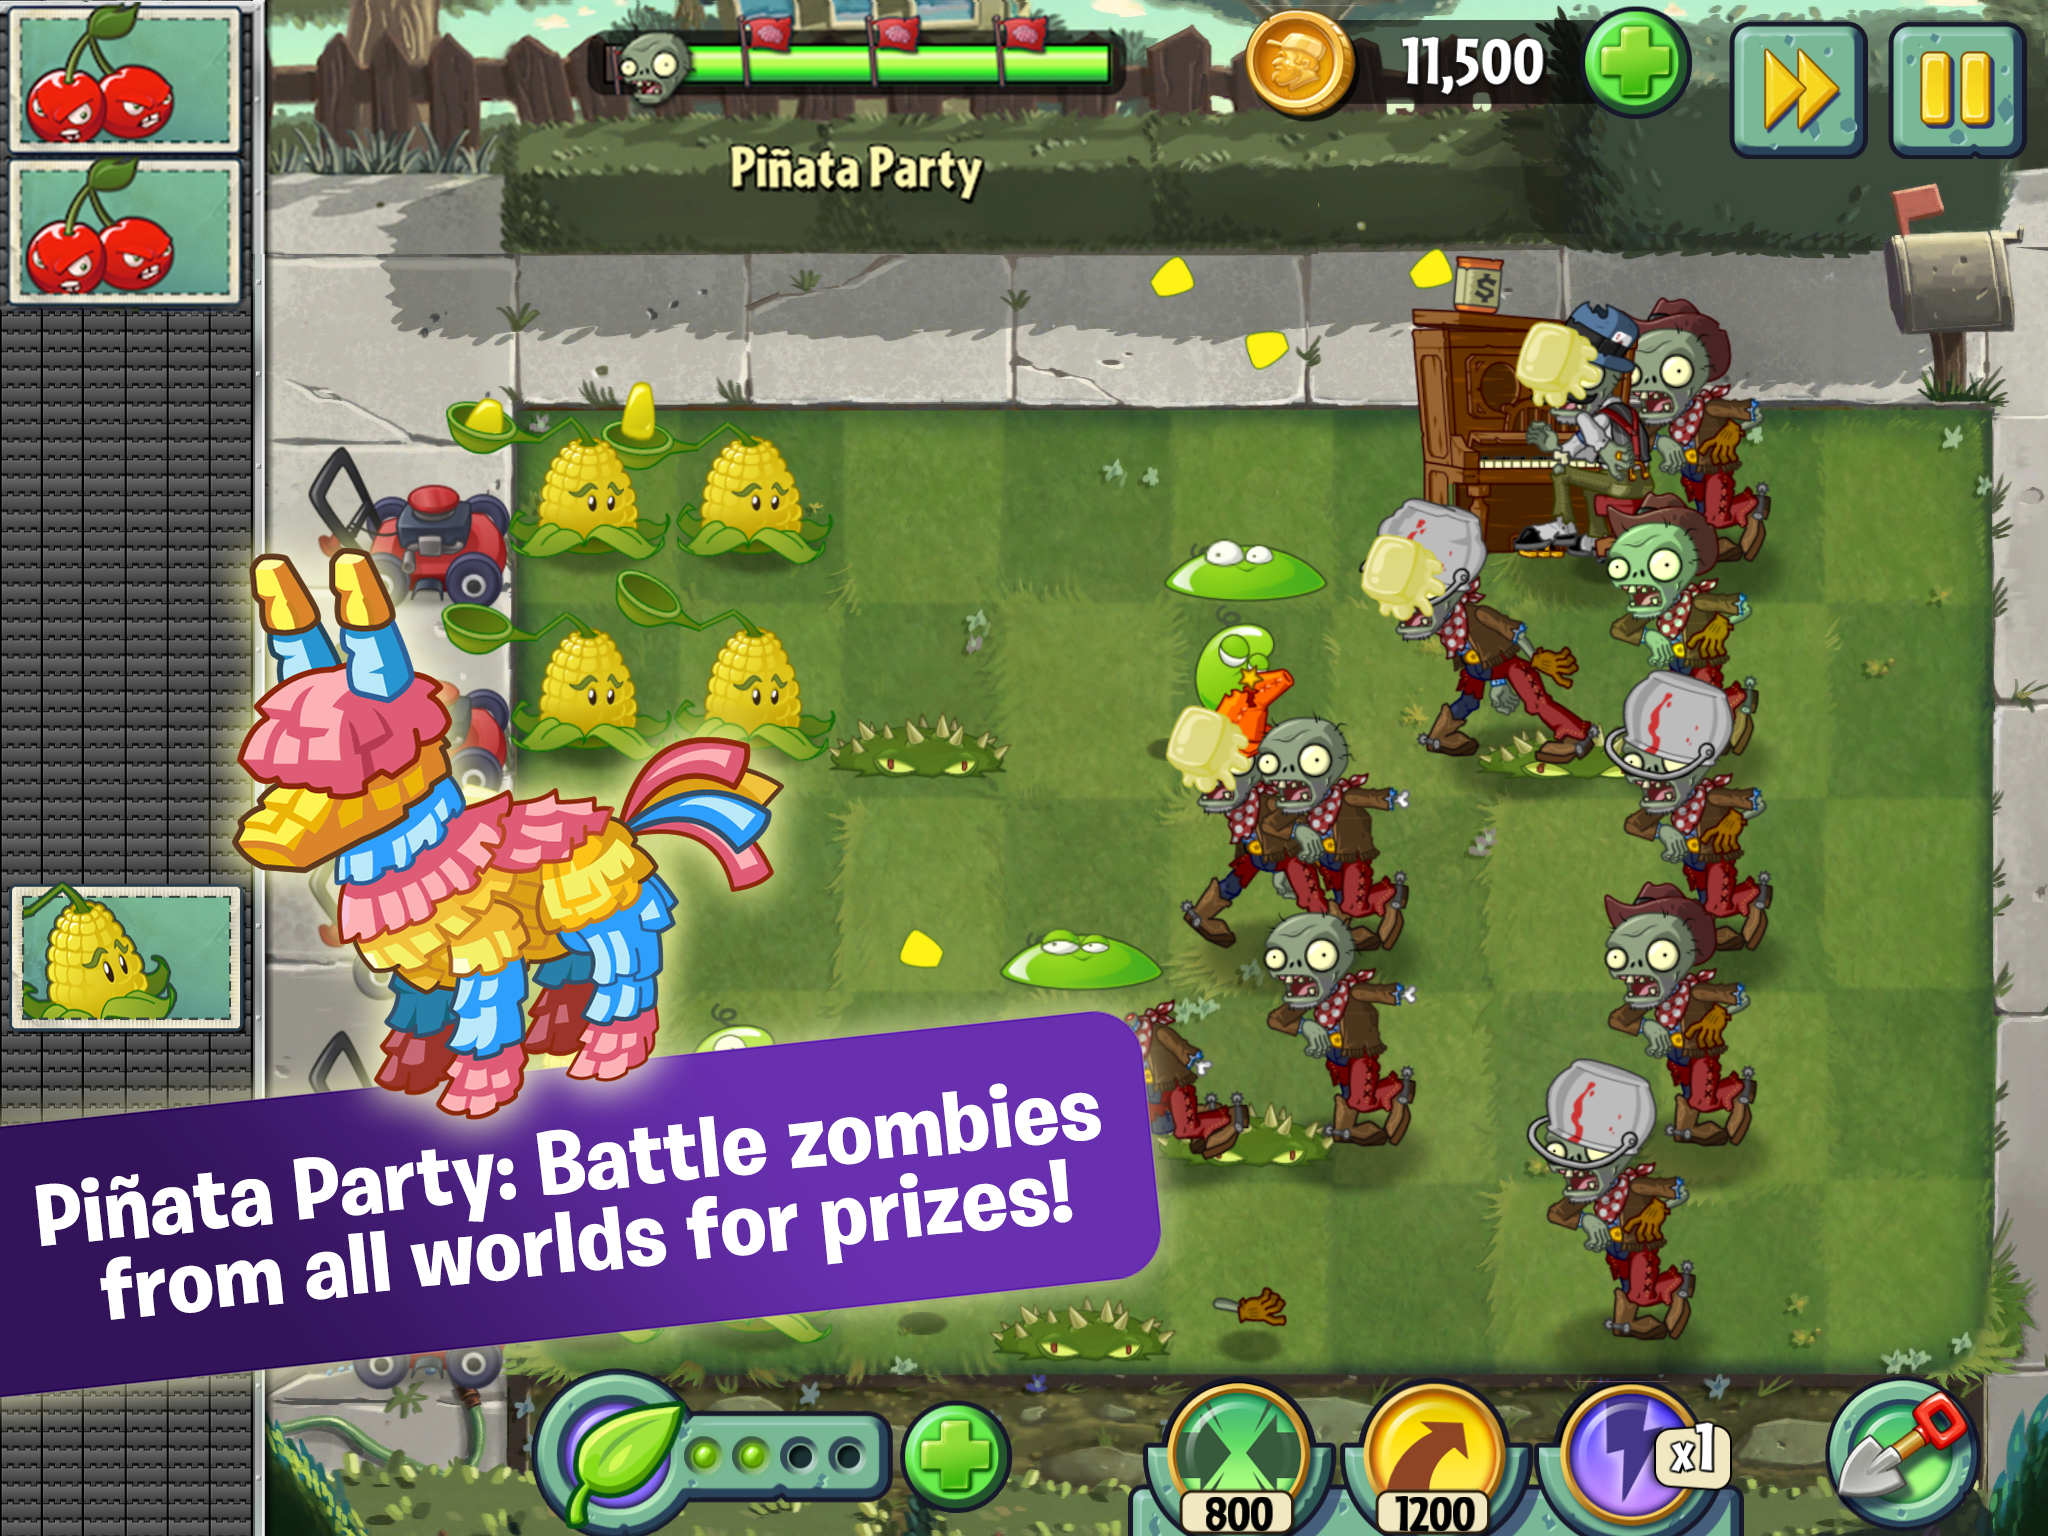 plants vs zombies 2 download full version free pc